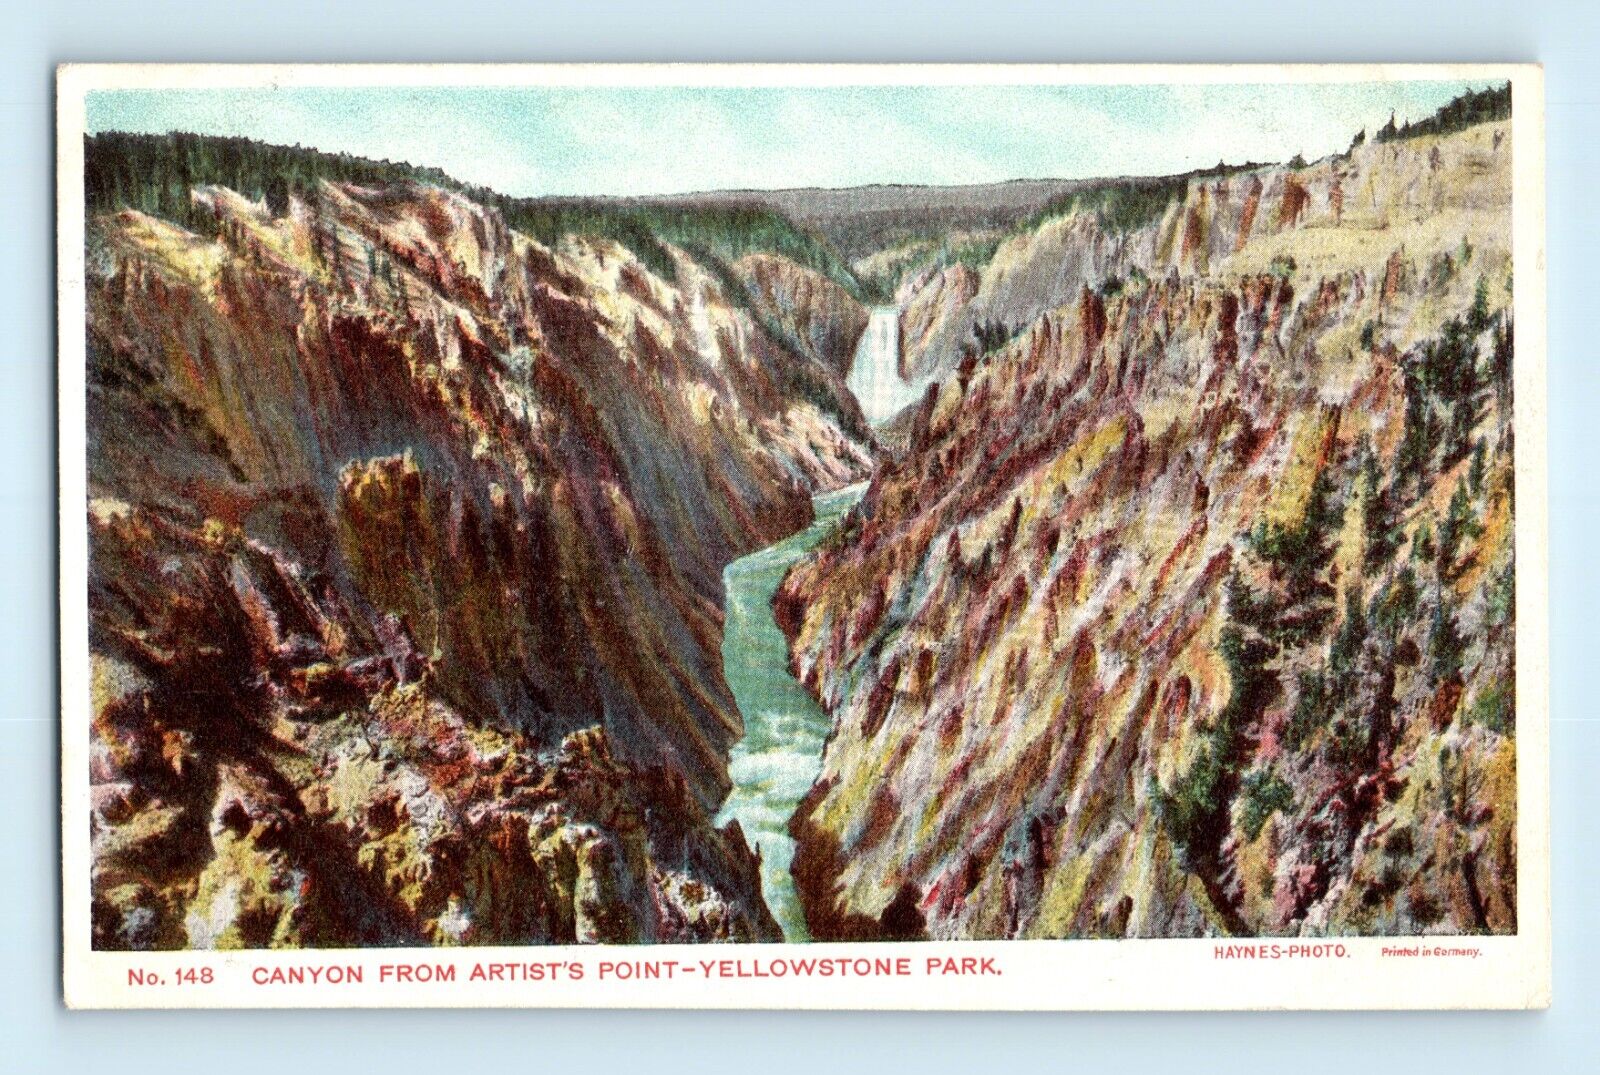 Yellowstone Park Haynes Photo 148 Canyon from Artist's Point Vintage Postcard B8